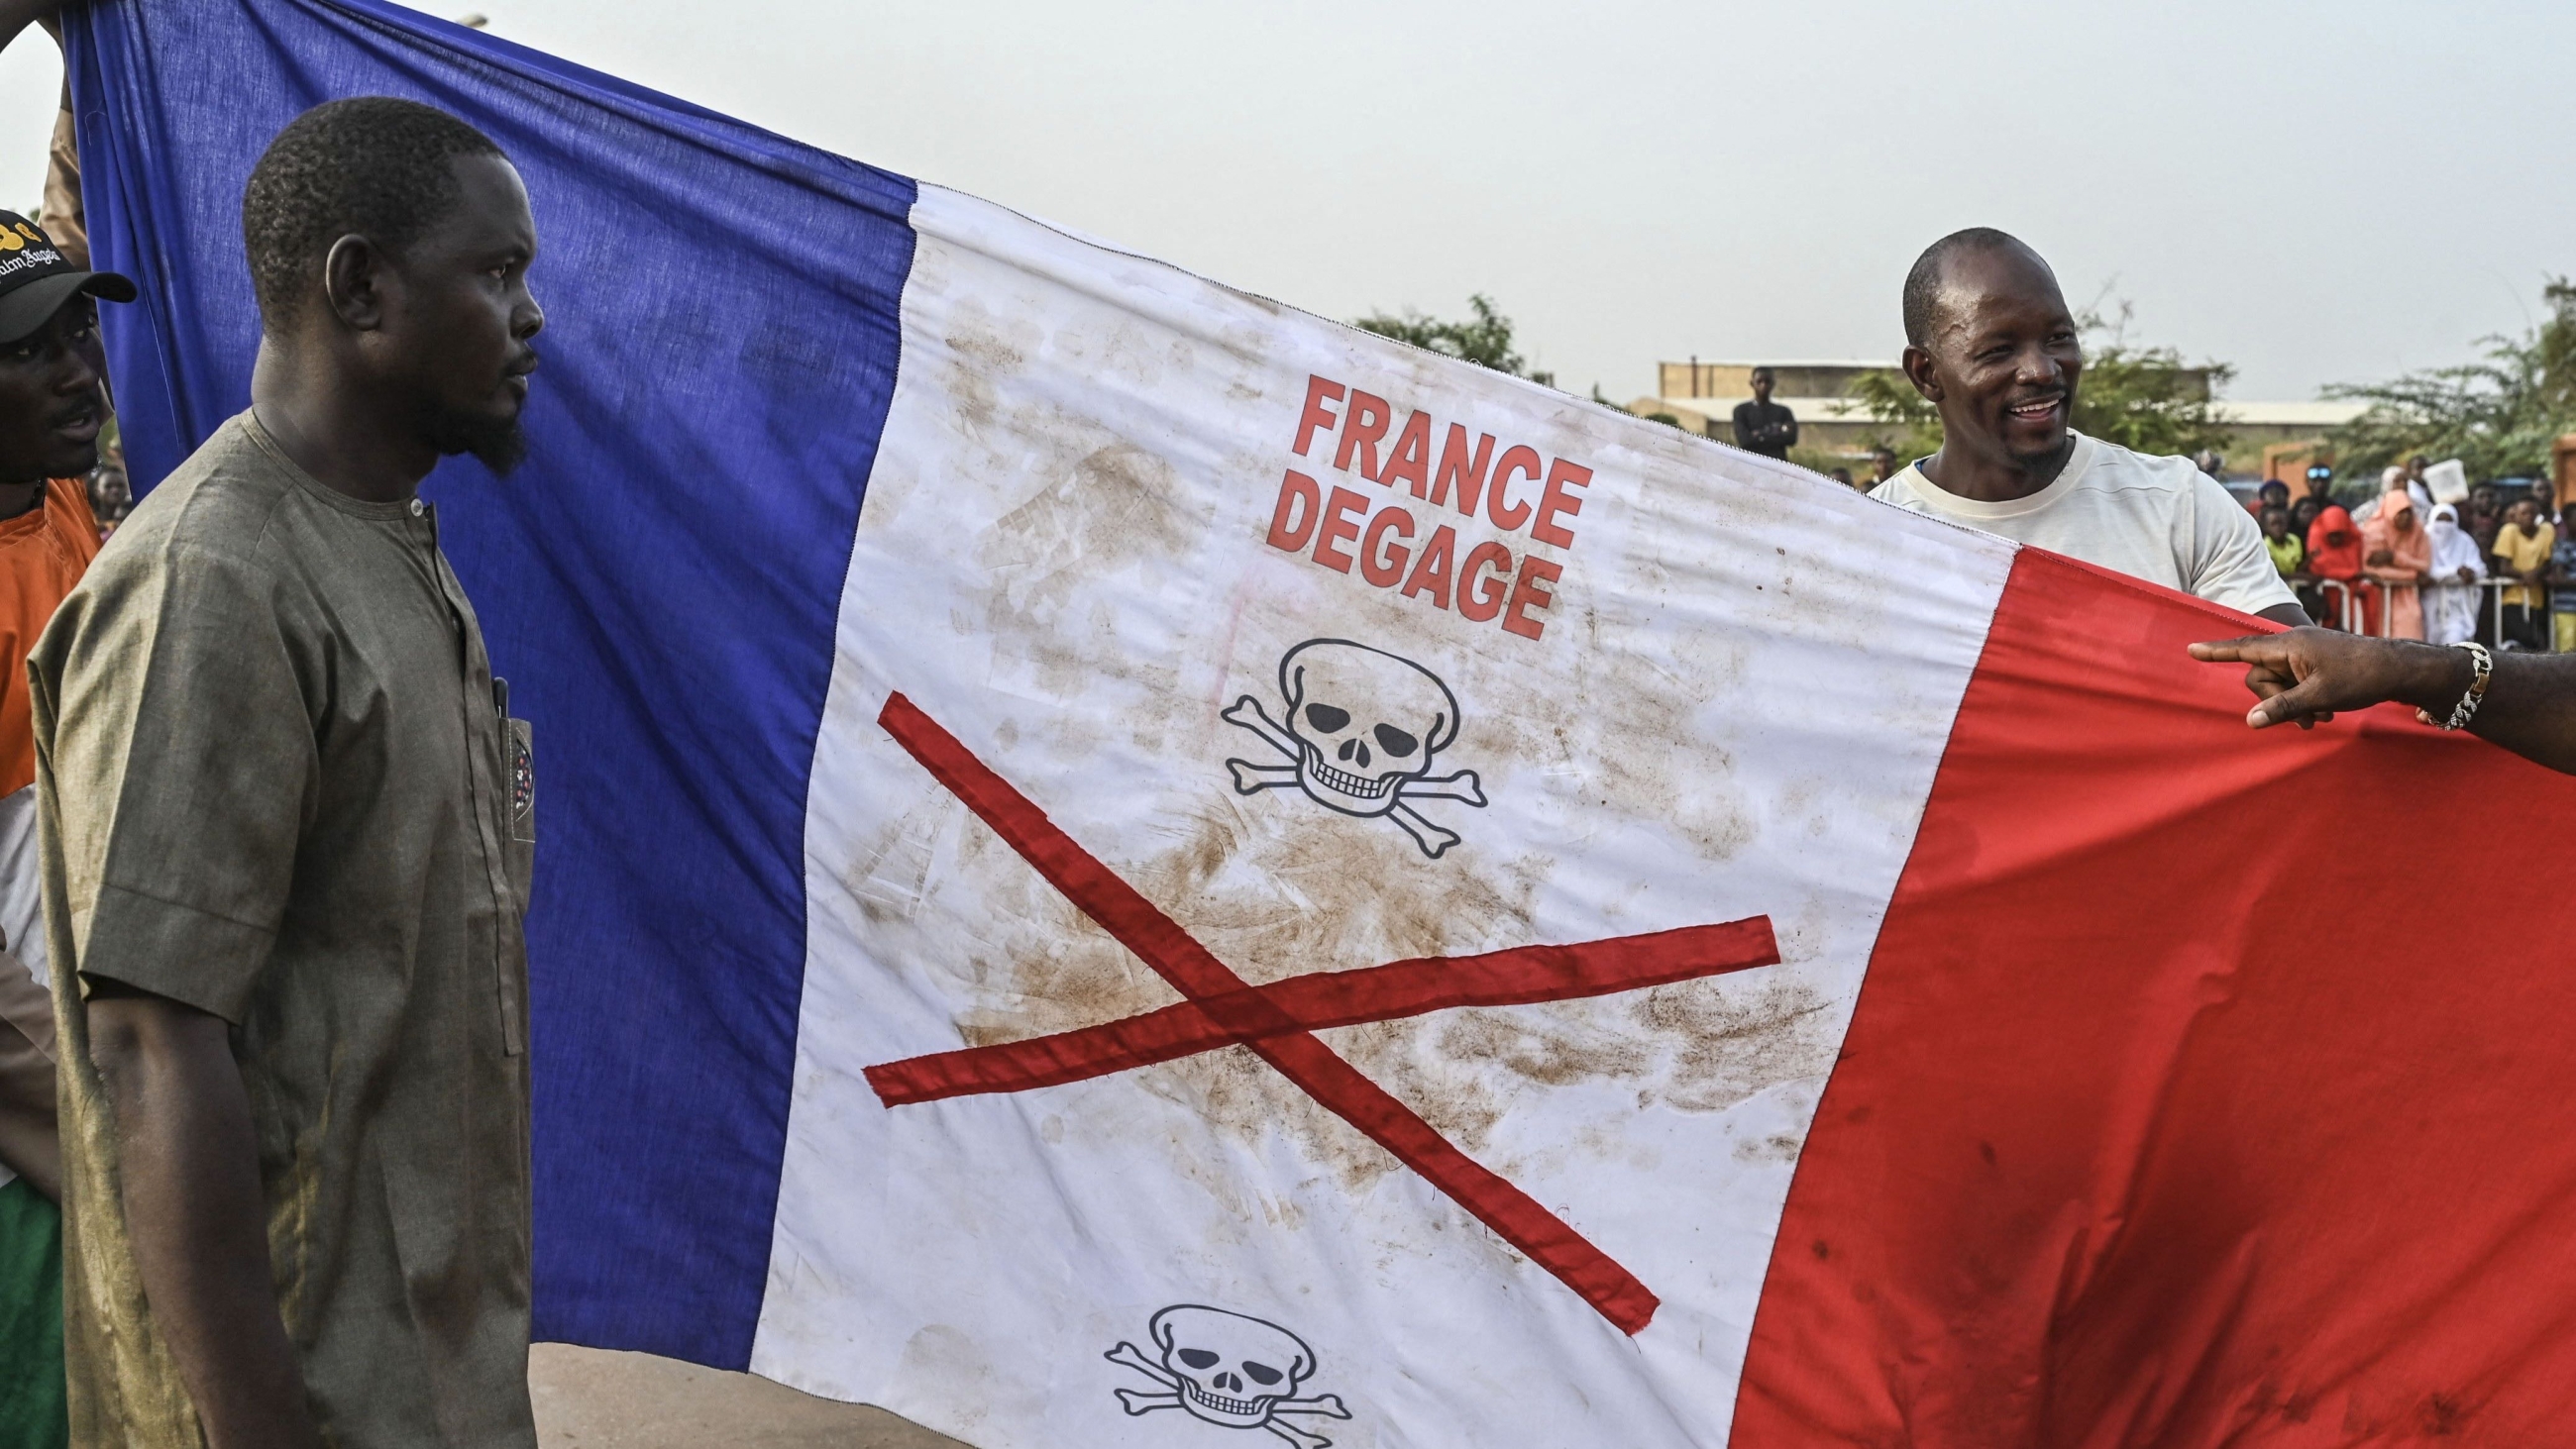 Nigeriens demand the end to the French military presence in their country during a protest on 1 September